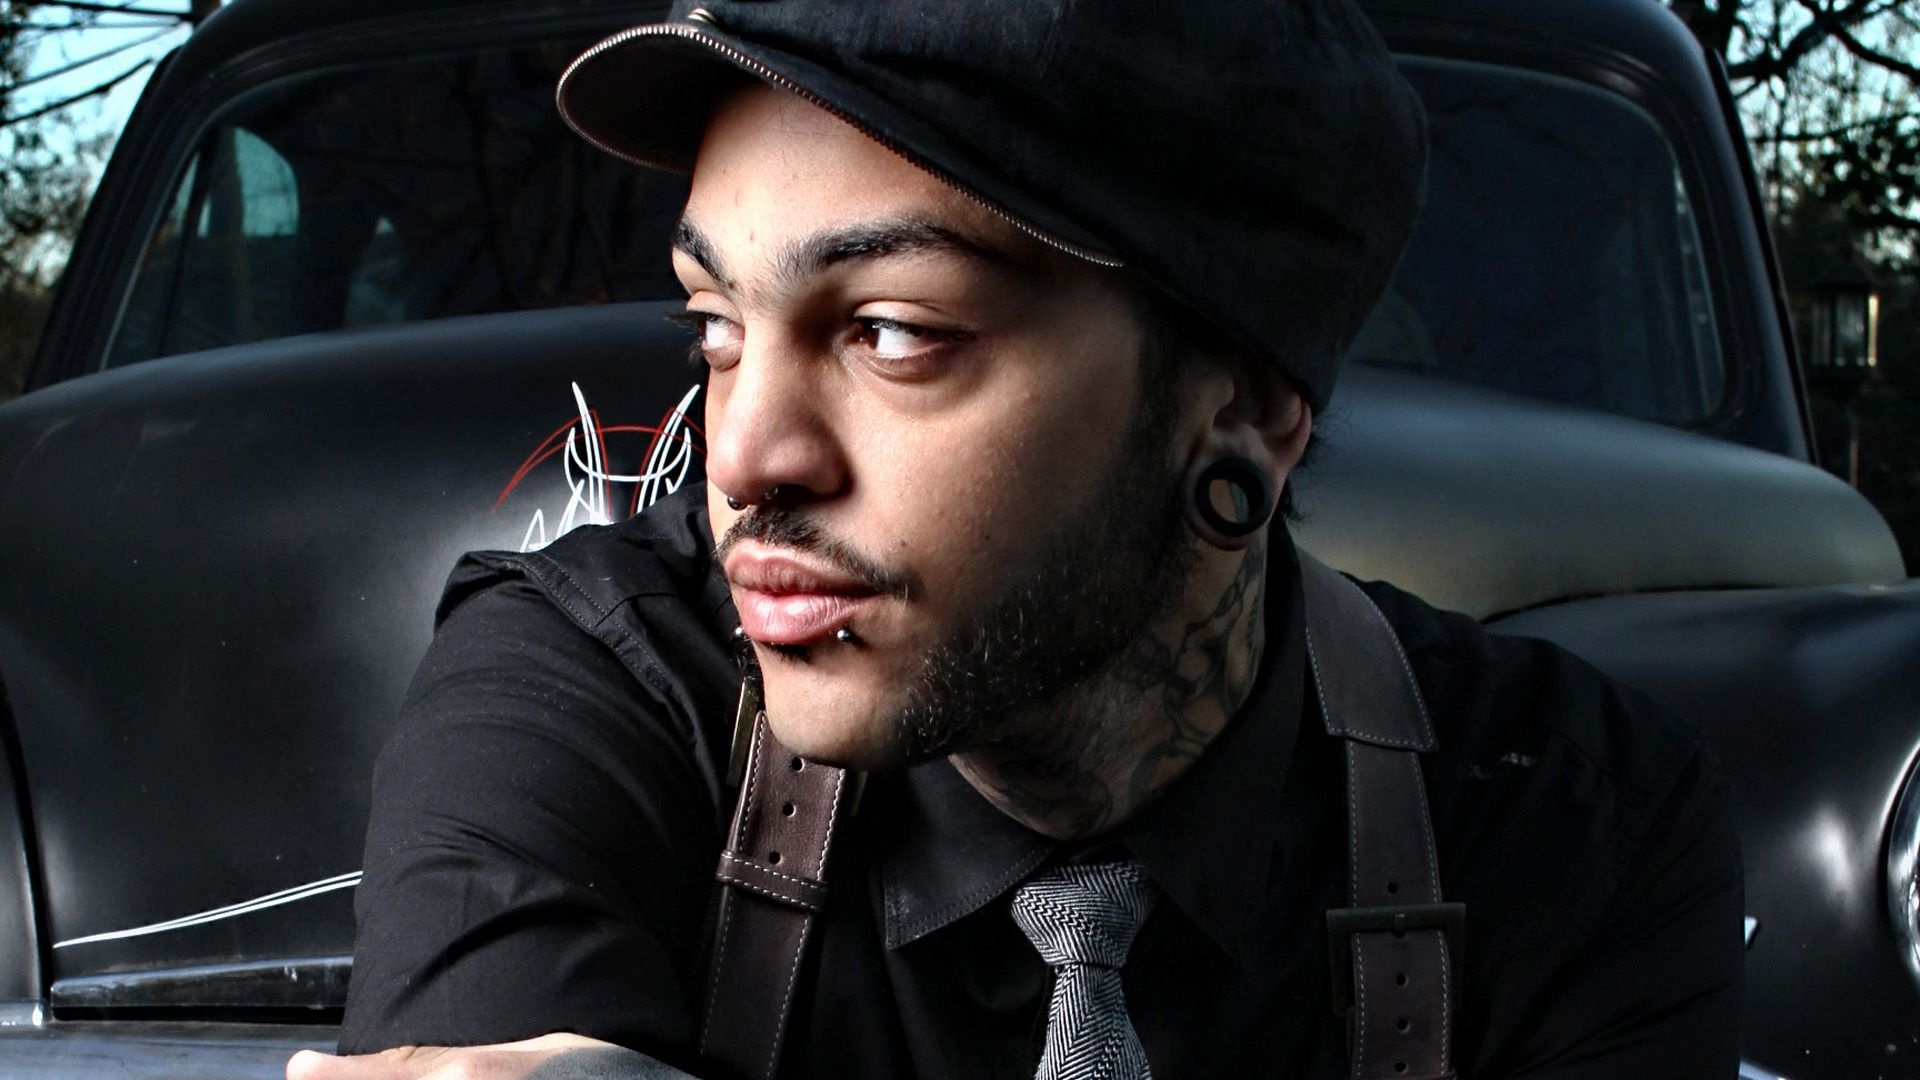 Travie McCoy's journey, Evocative music scenes, Striking wallpapers, Melodic background images, 1920x1080 Full HD Desktop